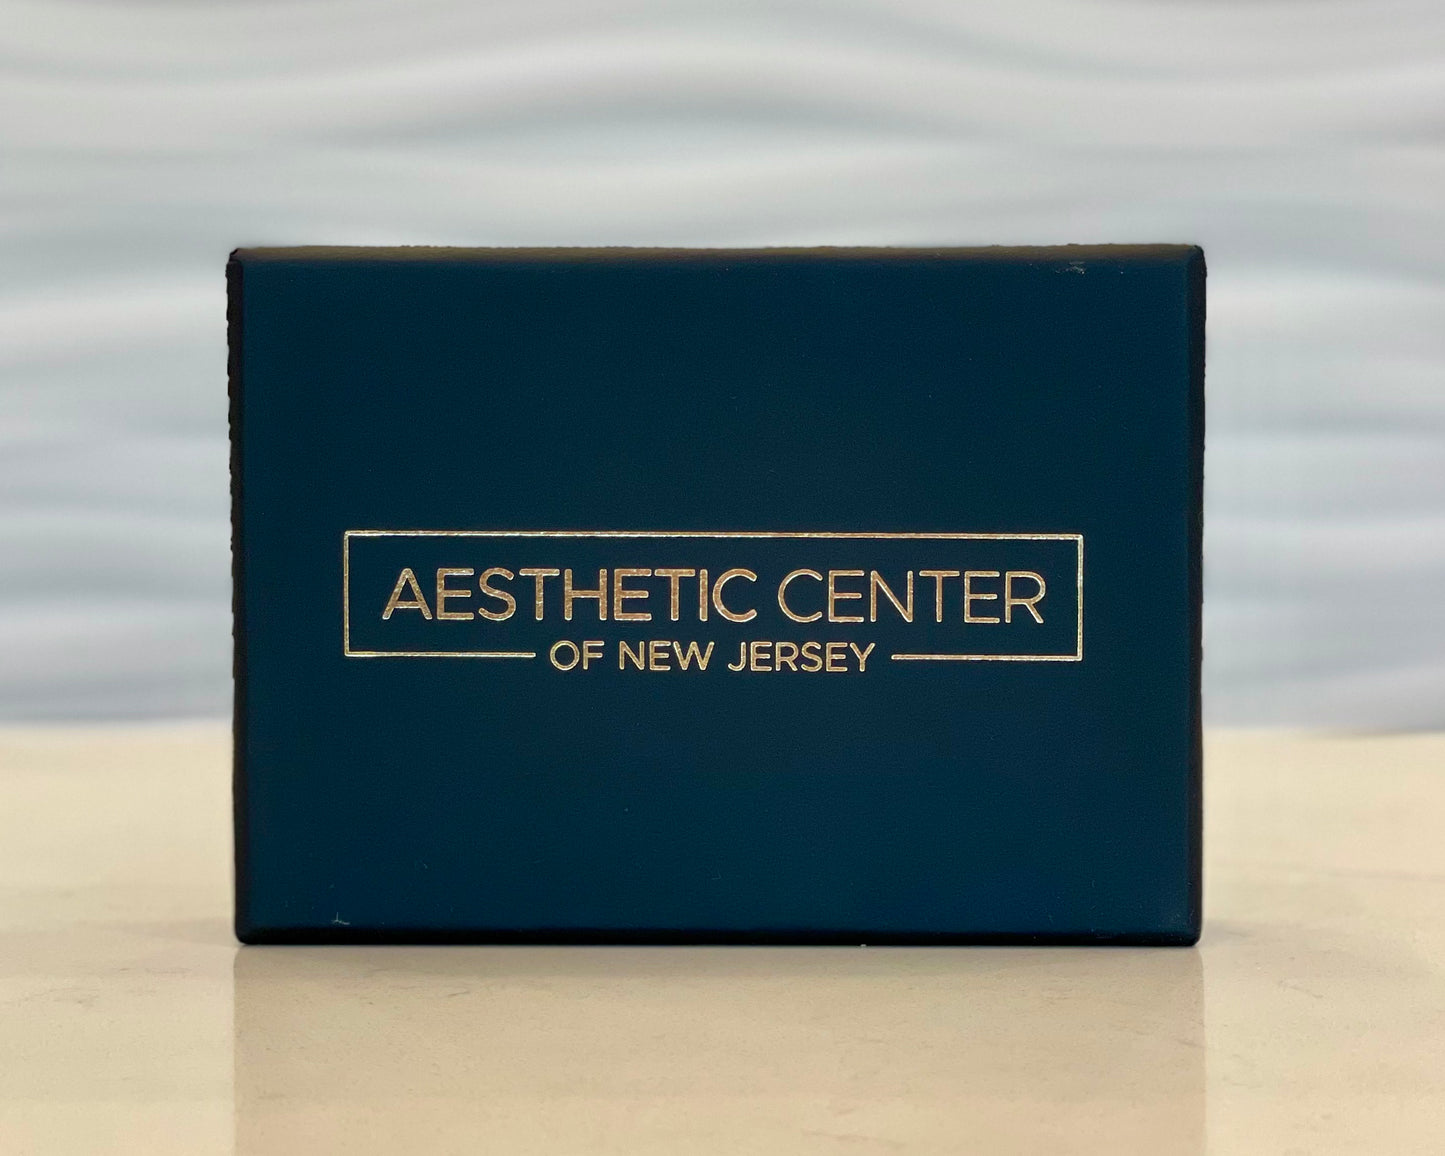 Aesthetic Center of New Jersey gift card box.